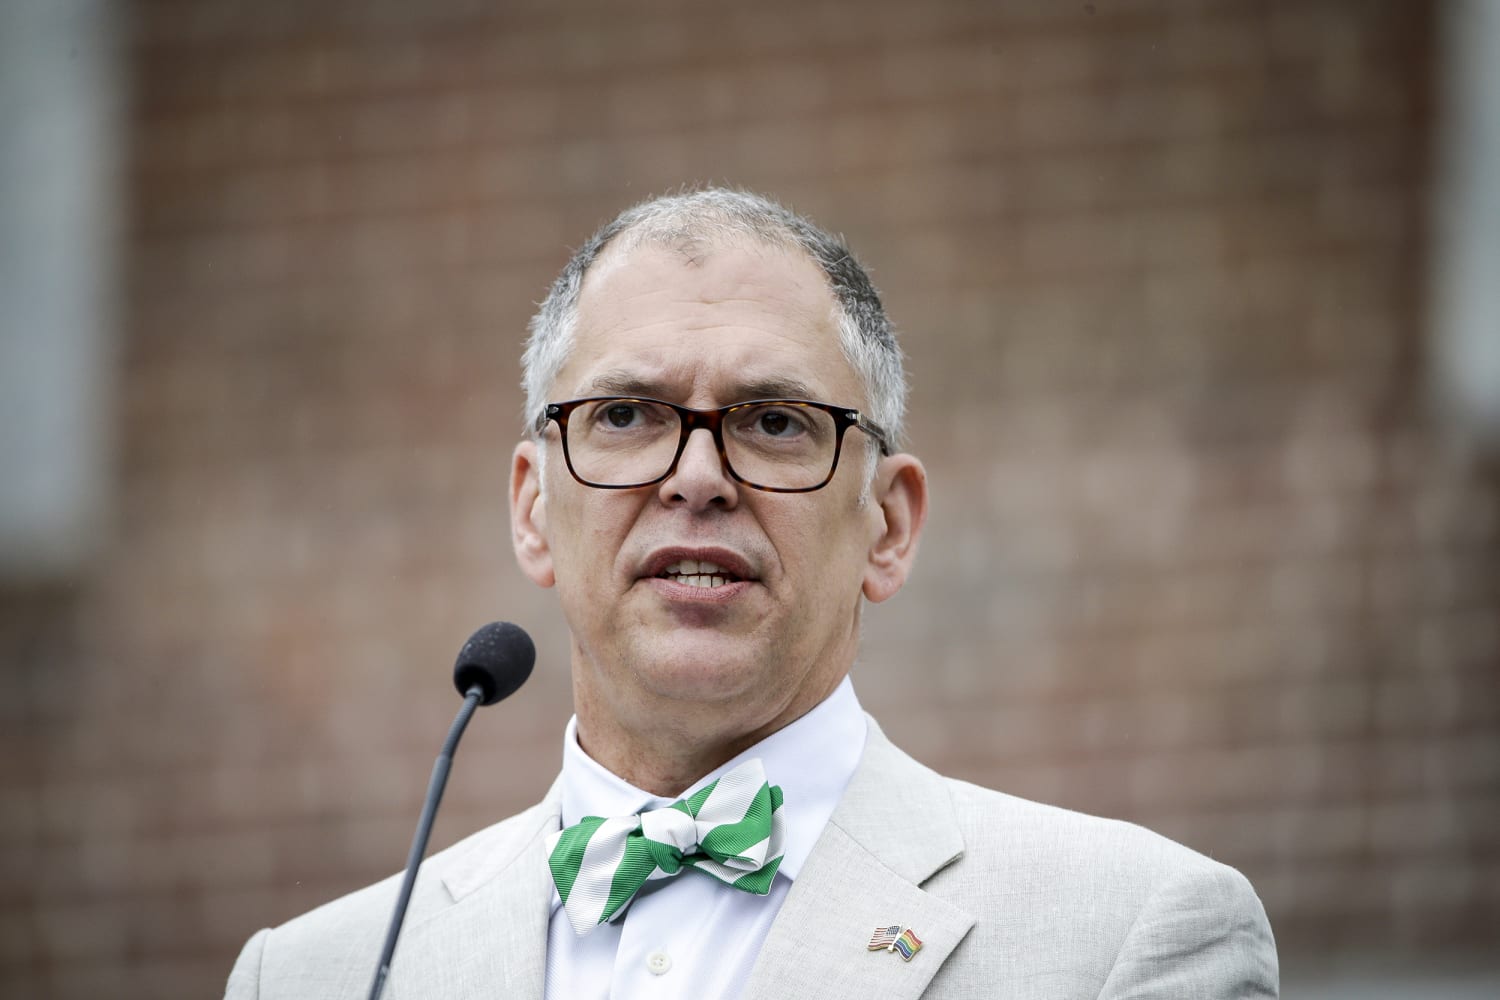 Jim Obergefell, who gave name to landmark Supreme Court case, to run for  Ohio House